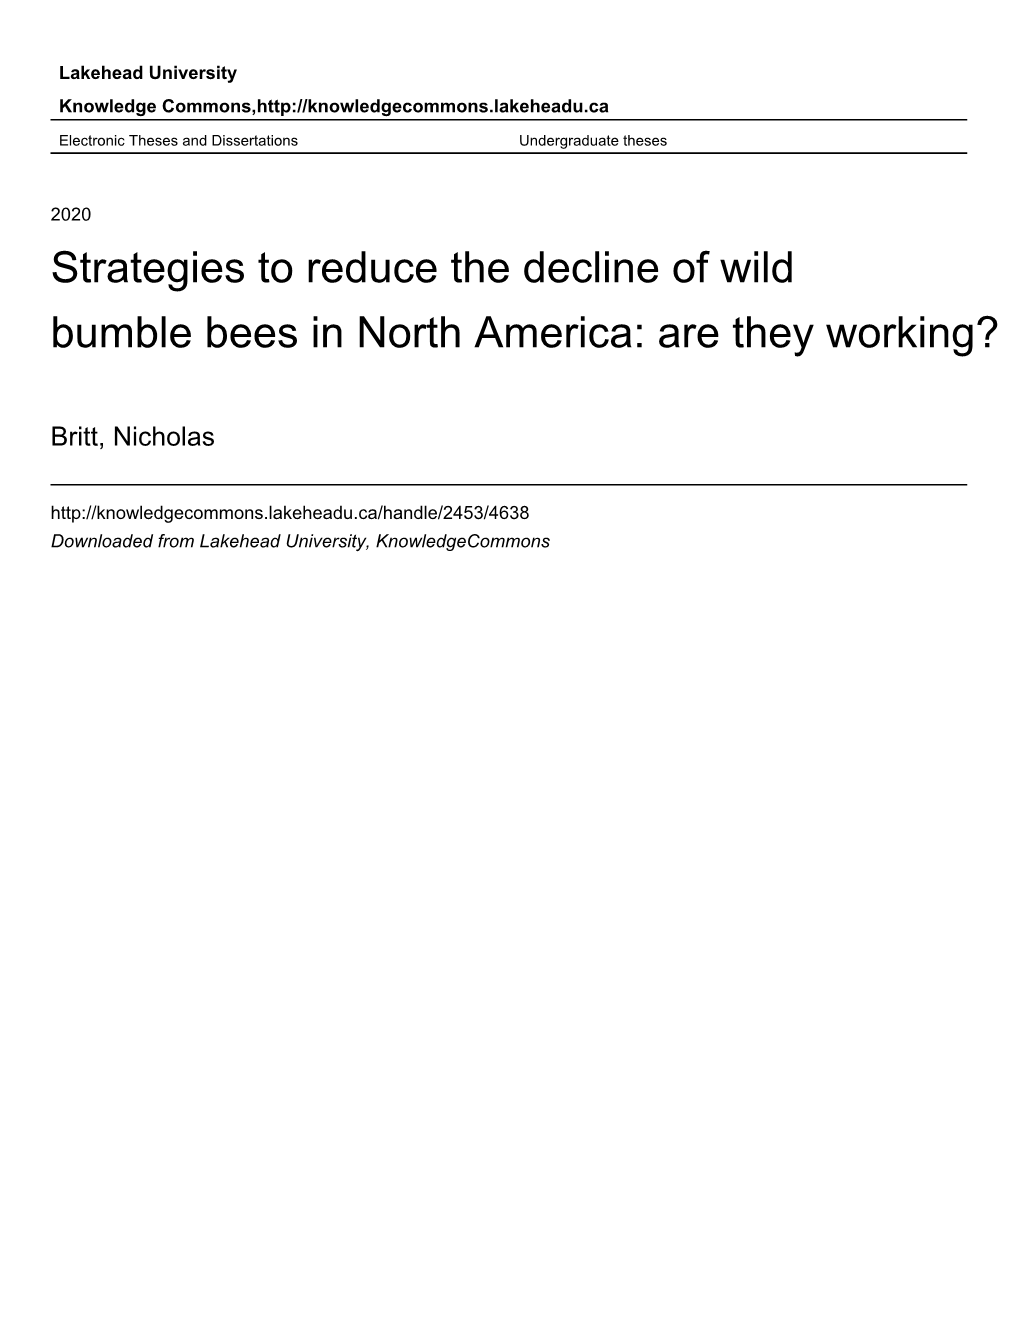 Strategies to Reduce the Decline of Wild Bumble Bees in North America: Are They Working?